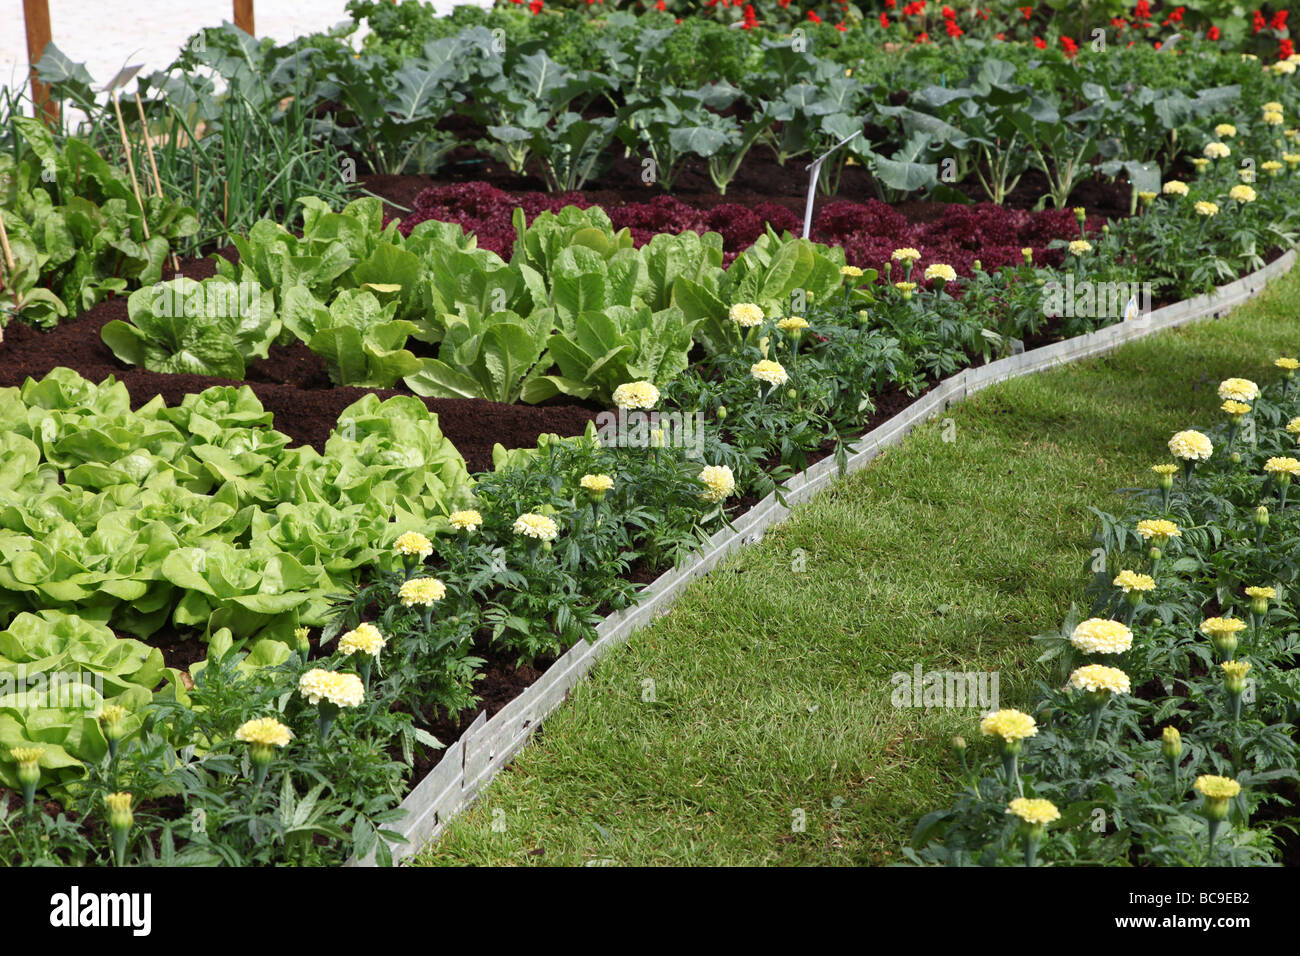 Vegetable plot laid out as White House vegetable garden Bloom 2009 Stock Photo